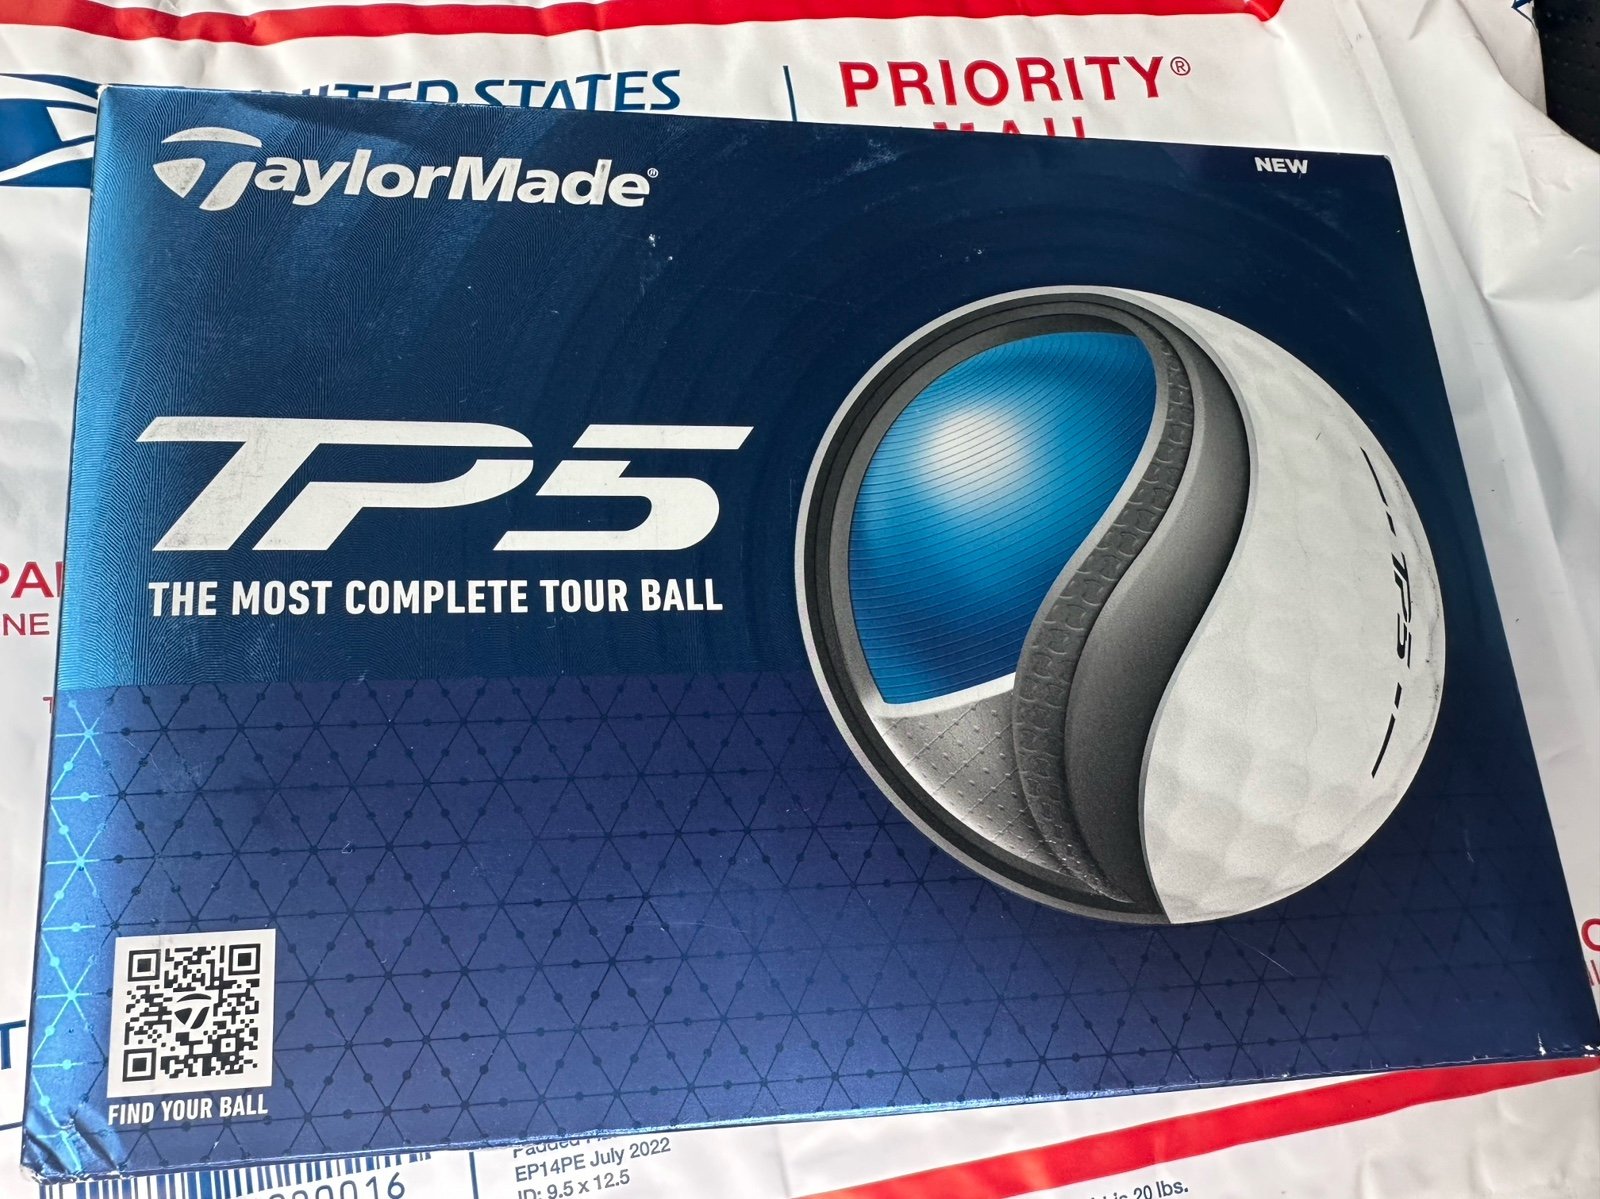 2 Dozen NEW TaylorMade TP5 Golf Balls Posted Price ONLY